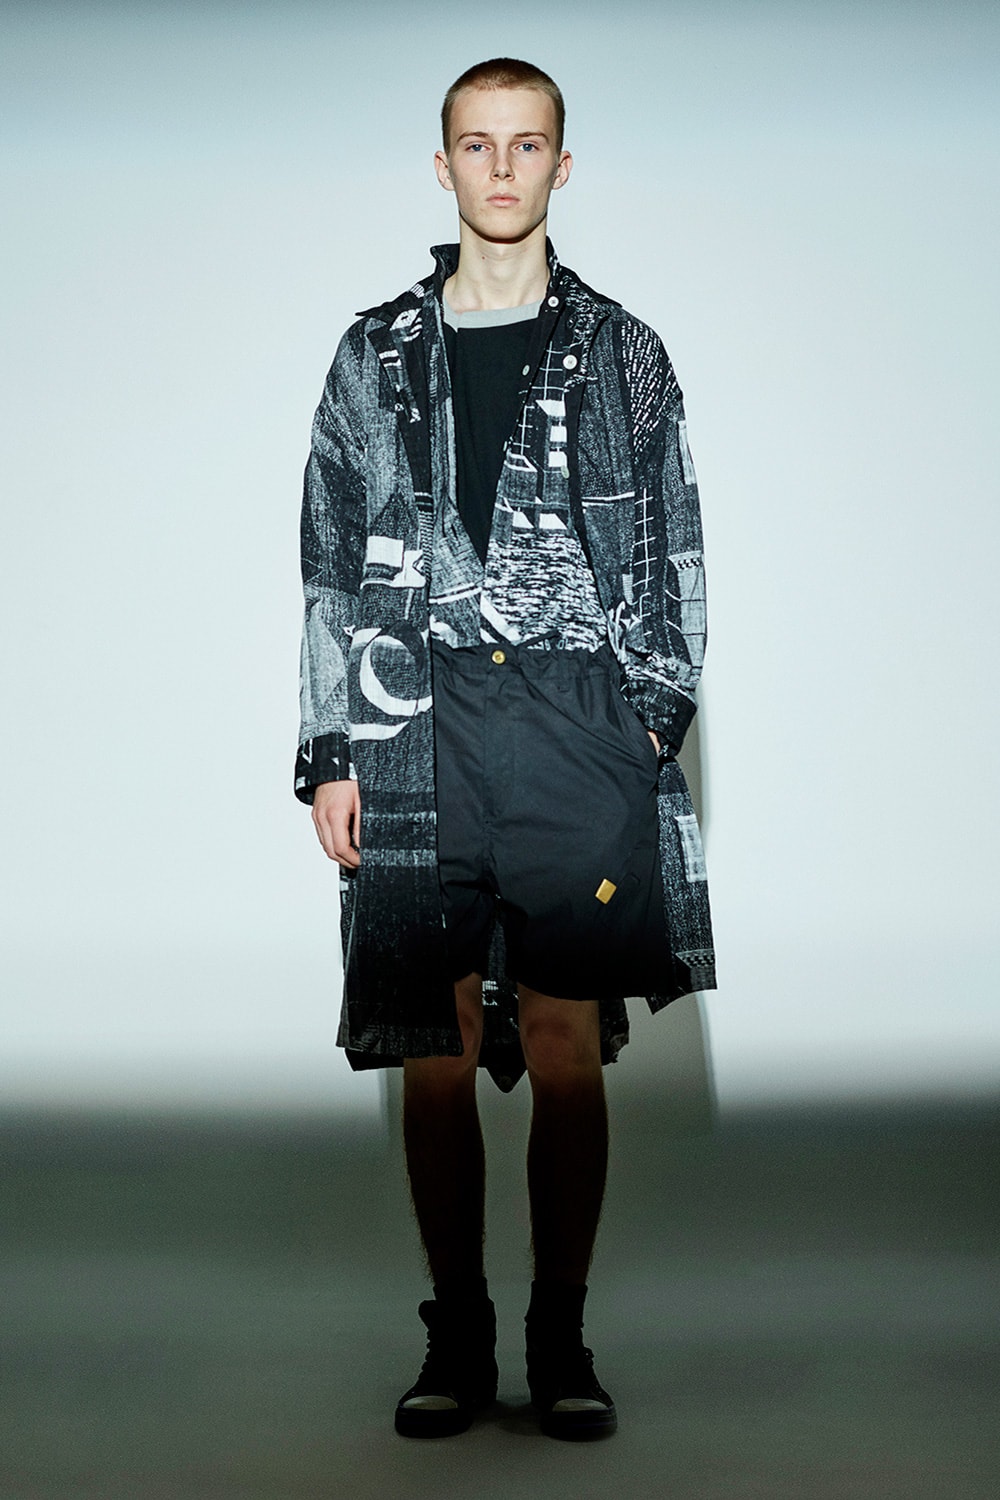 Phingerin Spring/Summer 2020 Lookbook Collection Japan streetwear fashion workwear americana vintage retro stylings bold patterns check print bondage trousers